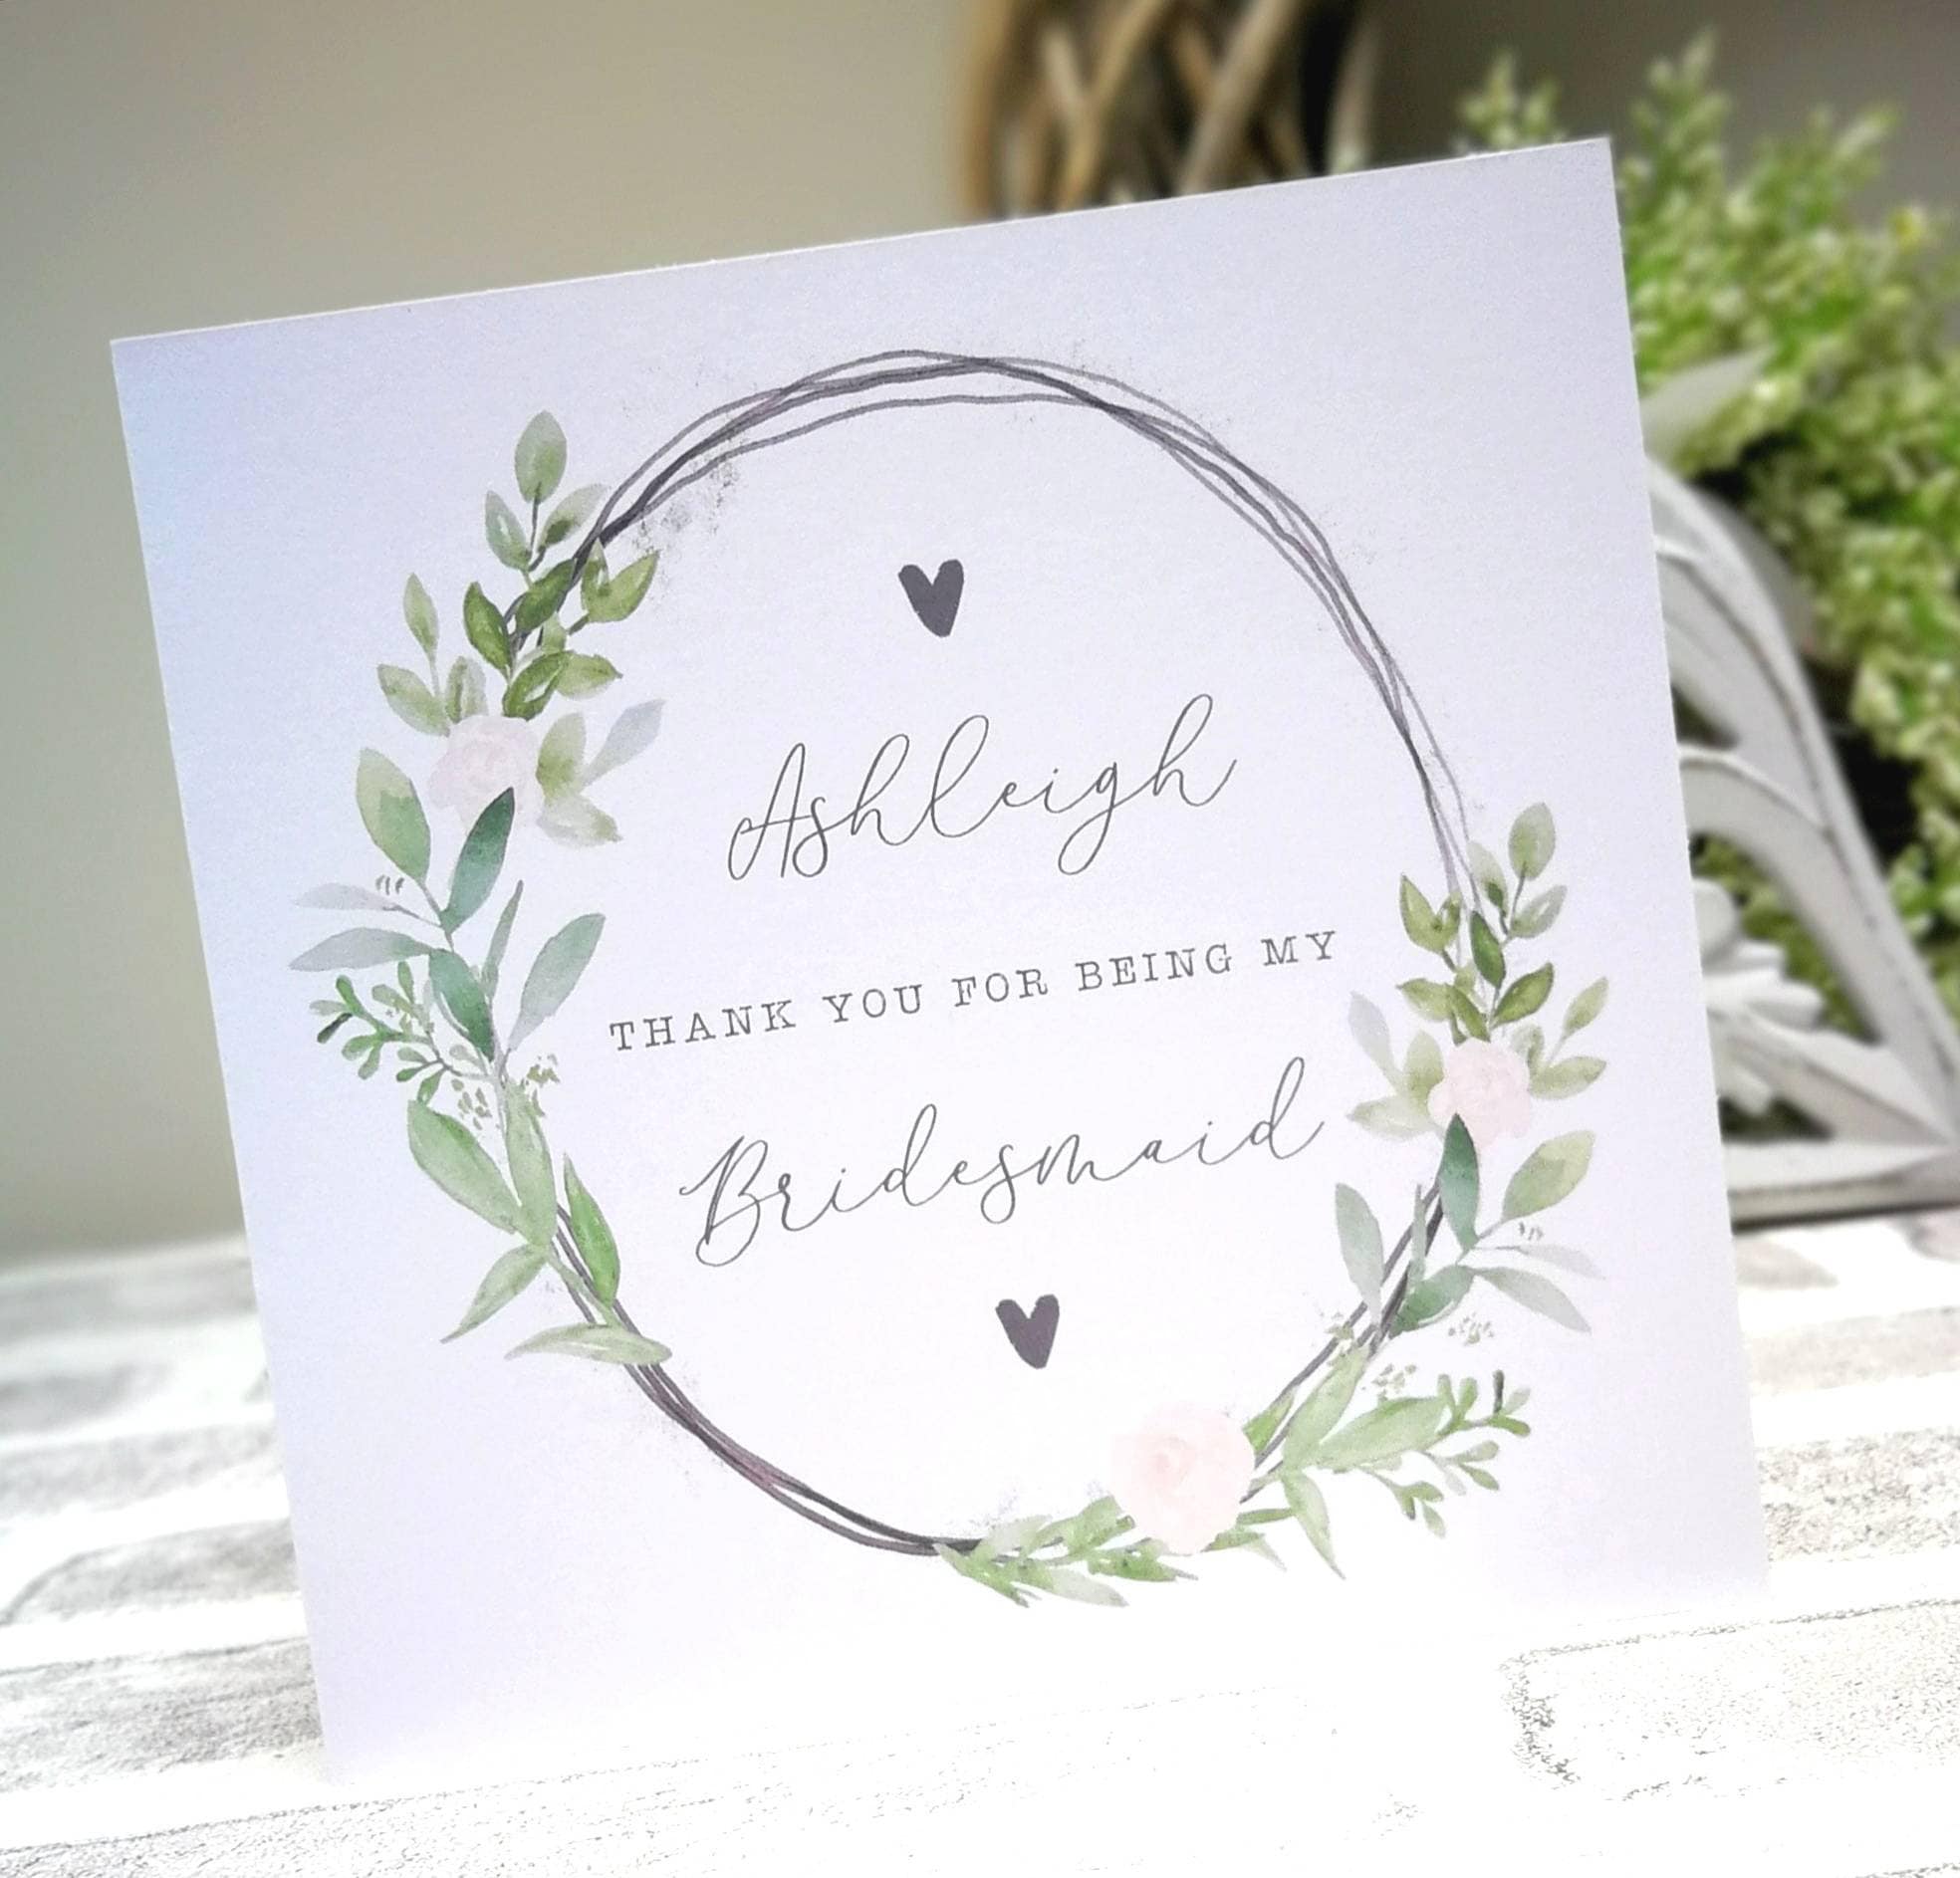 Personalised Thank You For Being My Bridesmaid - Chief Bridesman Attendant Card. Rustic, Botanical, Country Floral